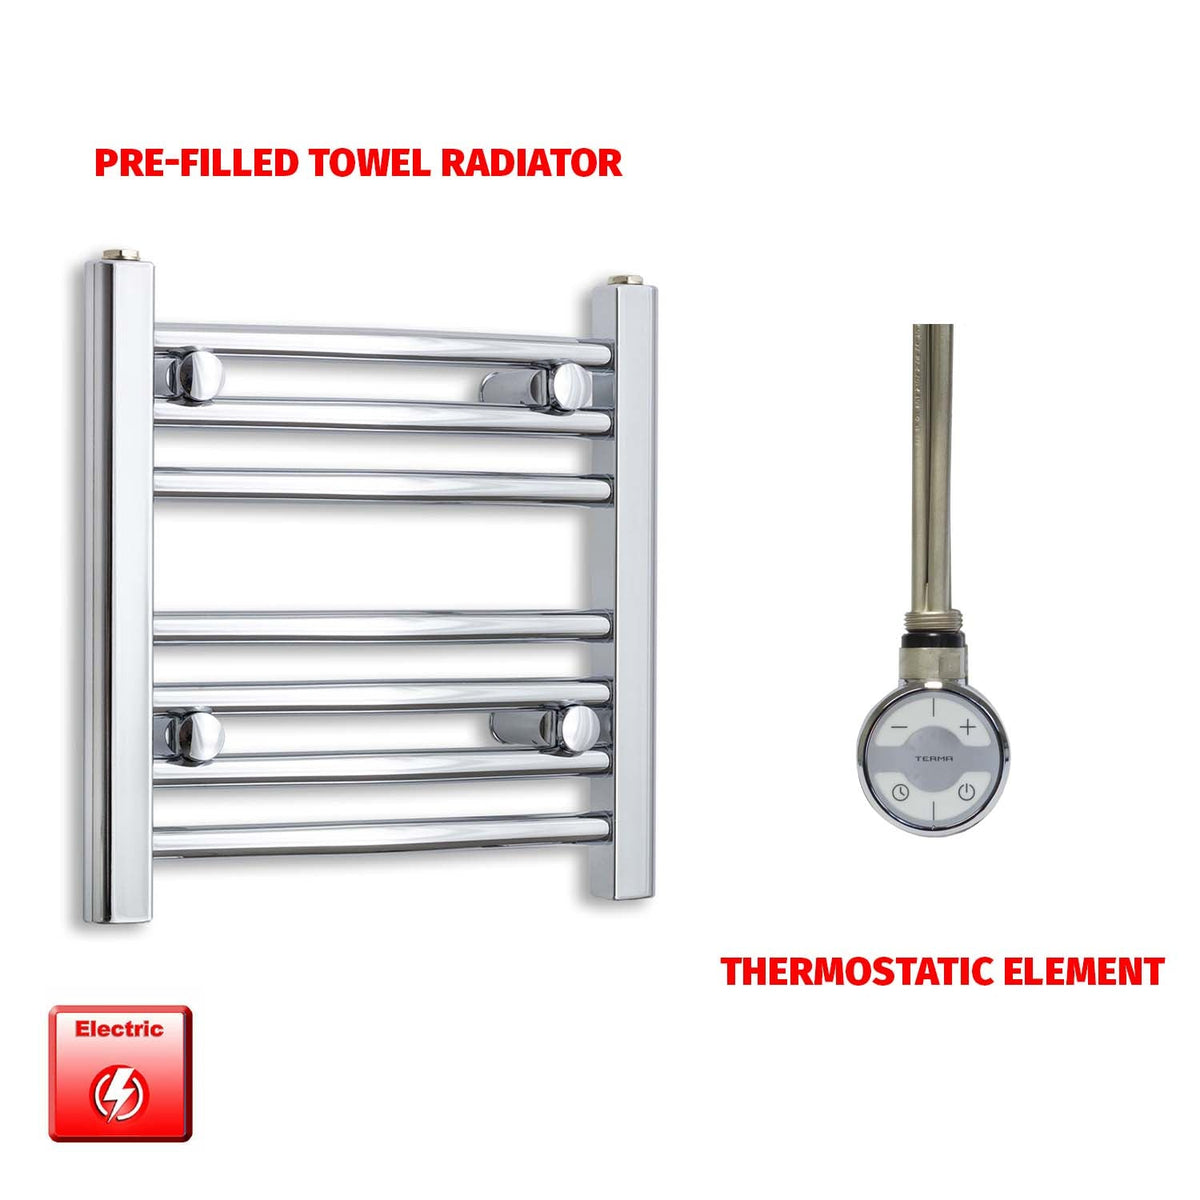 400 x 500mm Pre-Filled Electric Heated Towel Radiator Straight or Curved Chrome MOA Thermostatic element no timer